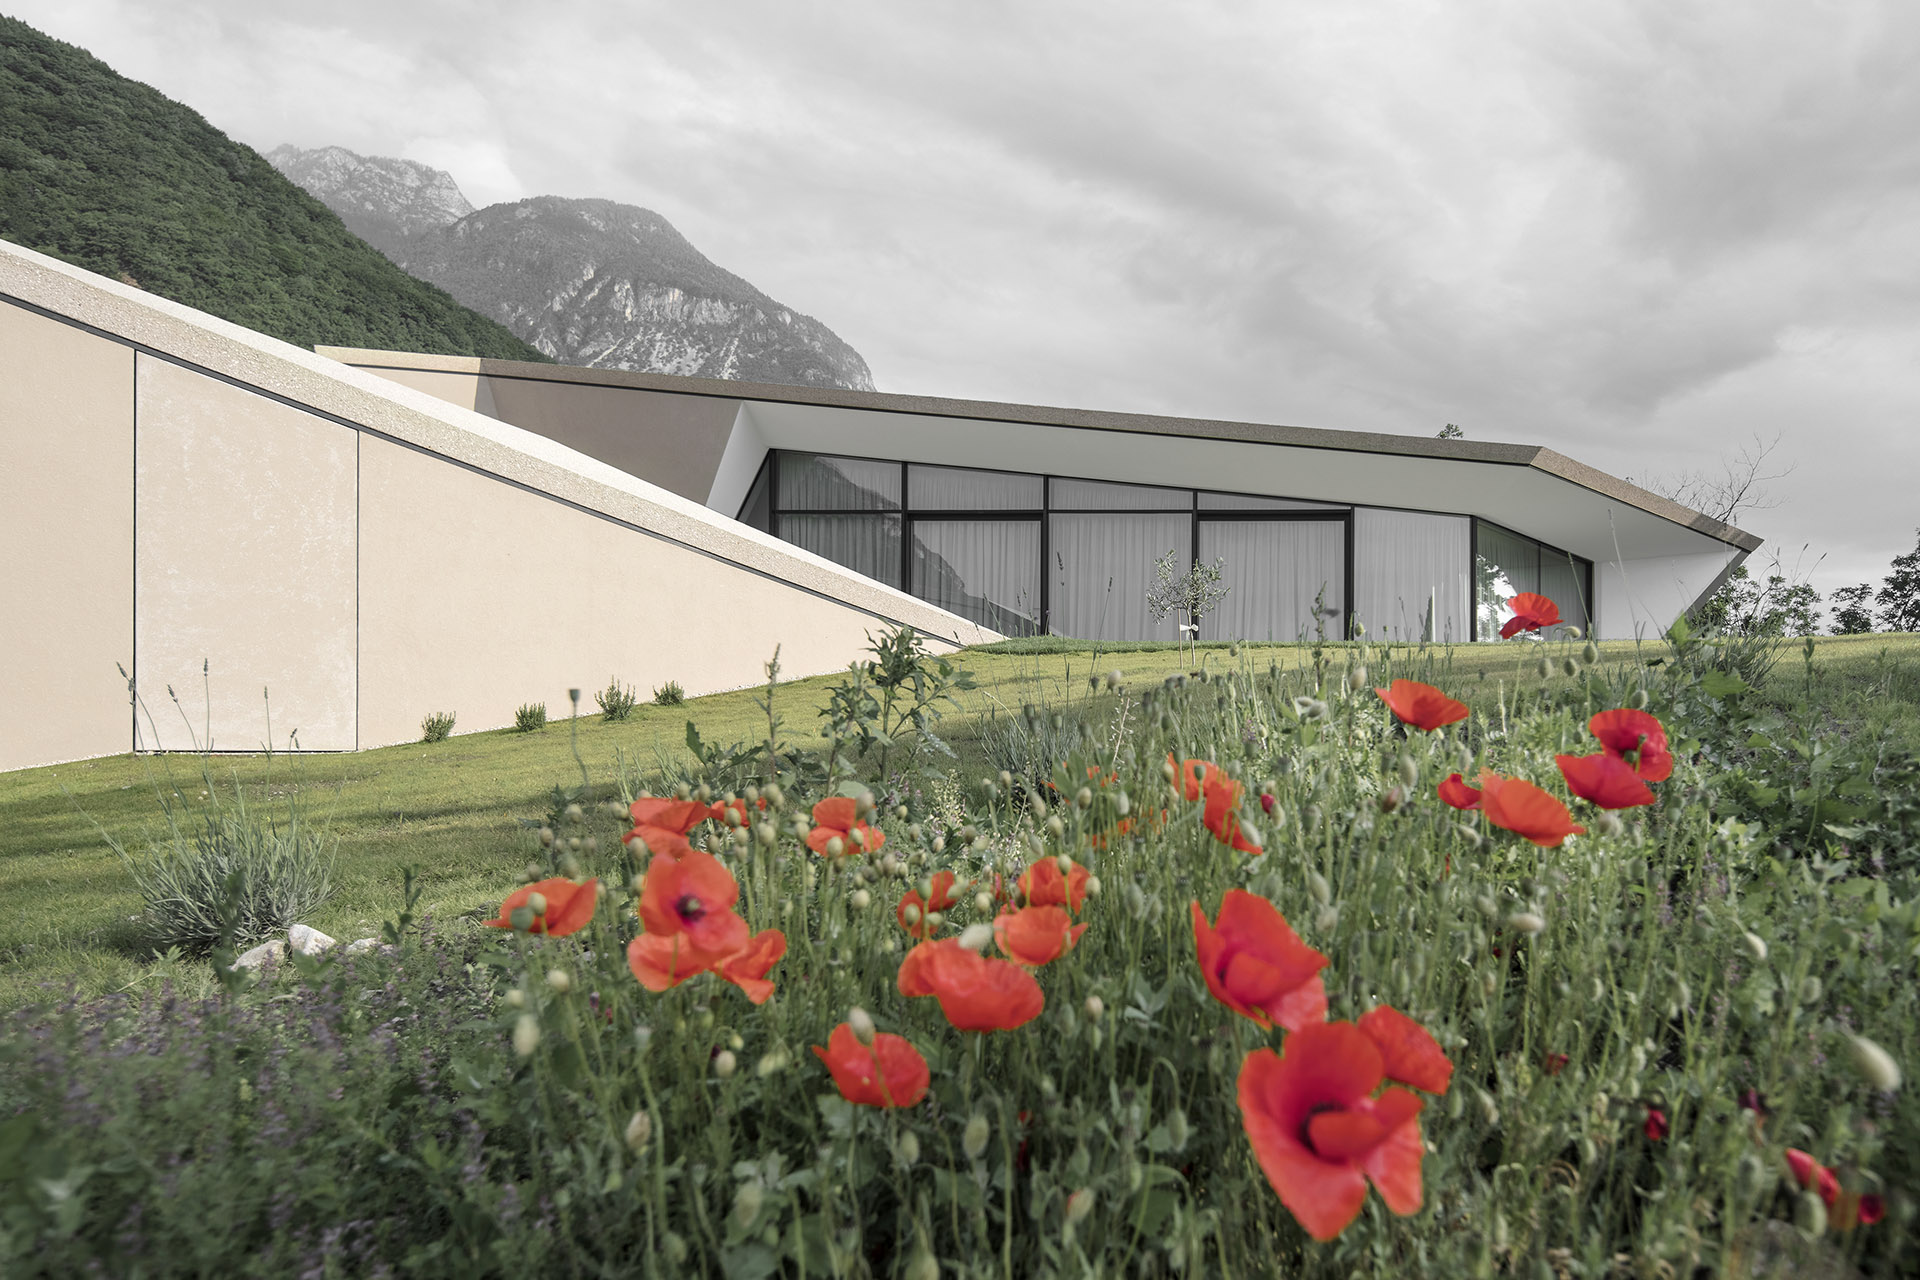 An architecture inspired by the vineyard landscape in northern Italy. Villa Kastelaz Hof in the home of Gewürztraminer